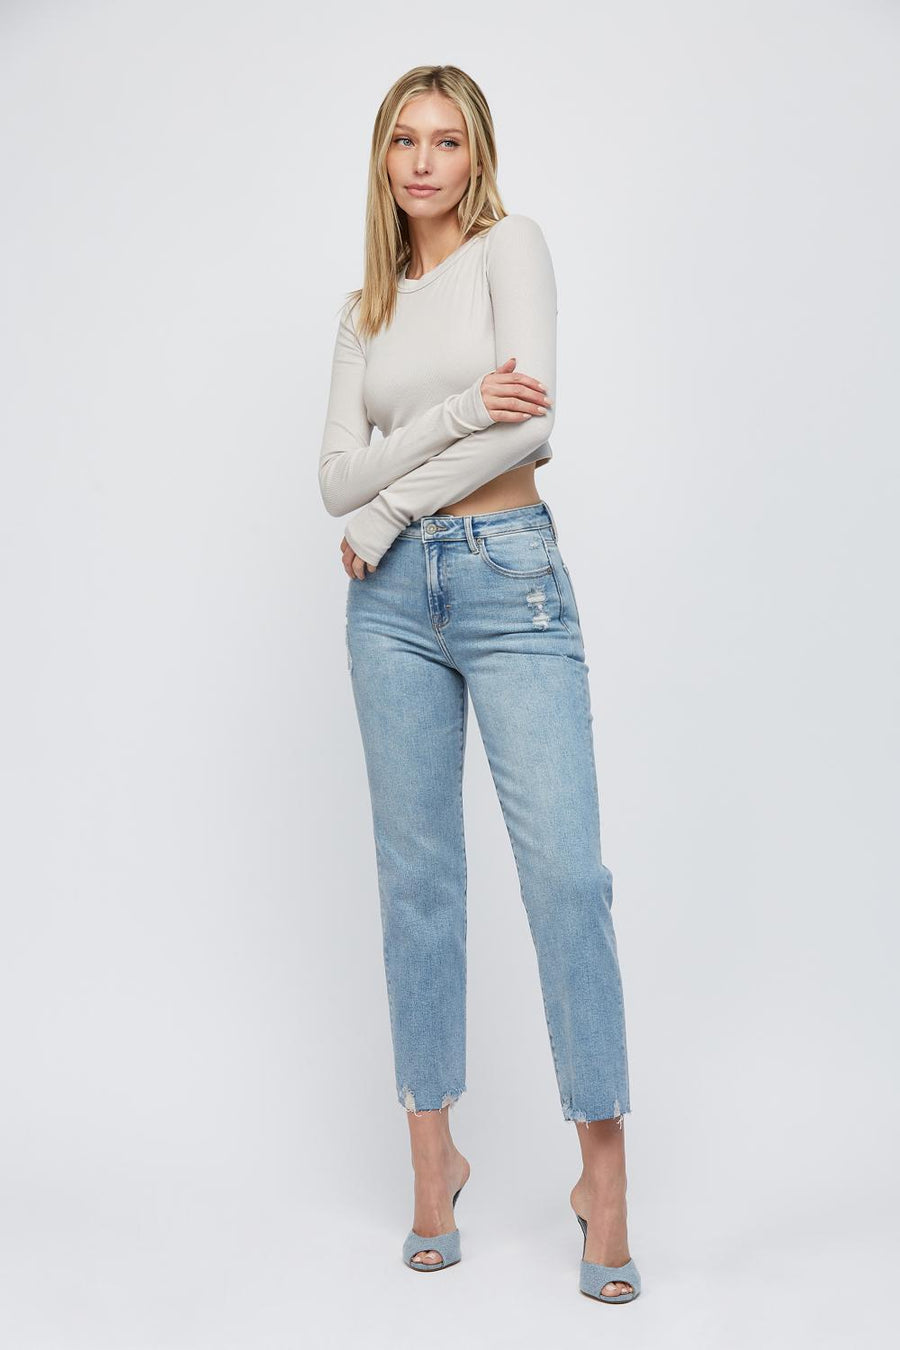 [TRACEY] MEDIUM LIGHT GRINDED CROPPED STRAIGHT